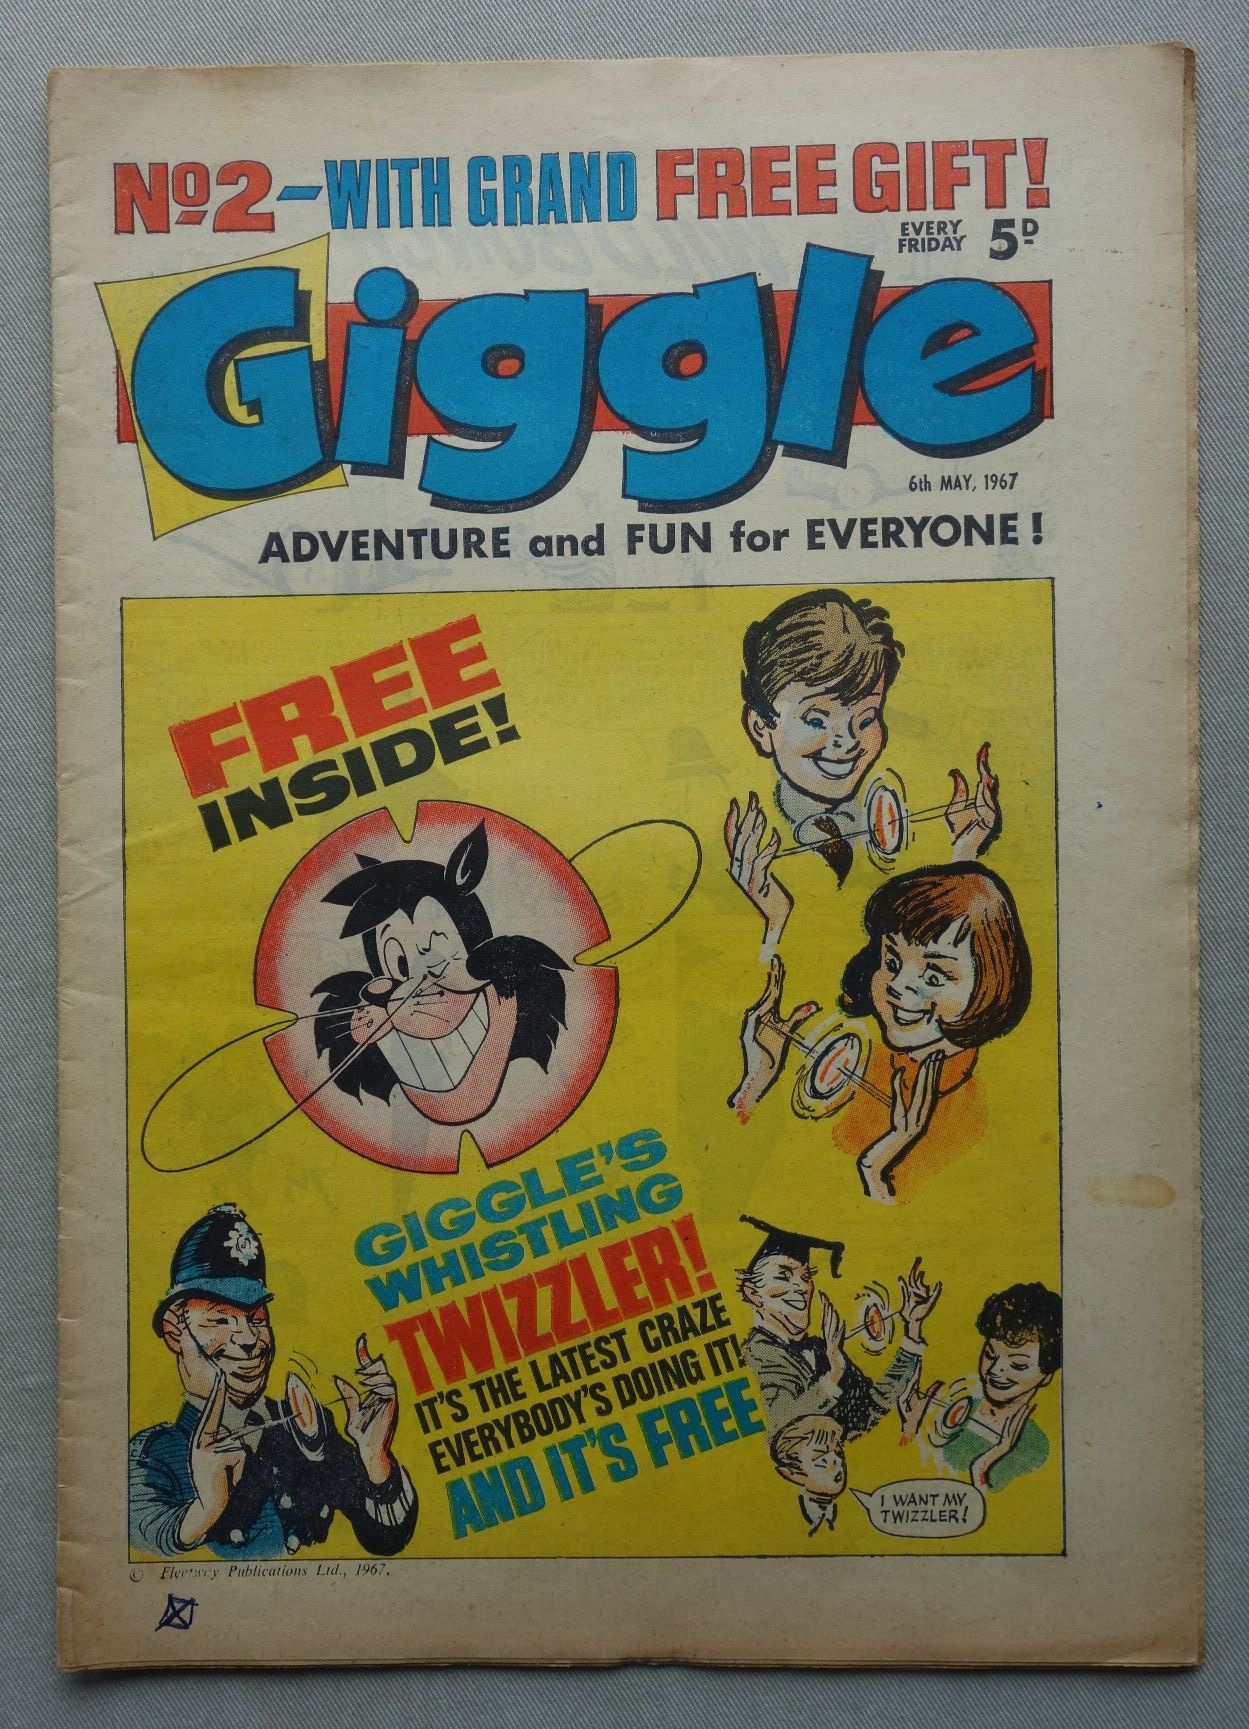 Giggle No. 2 cover dated 6th May 1967